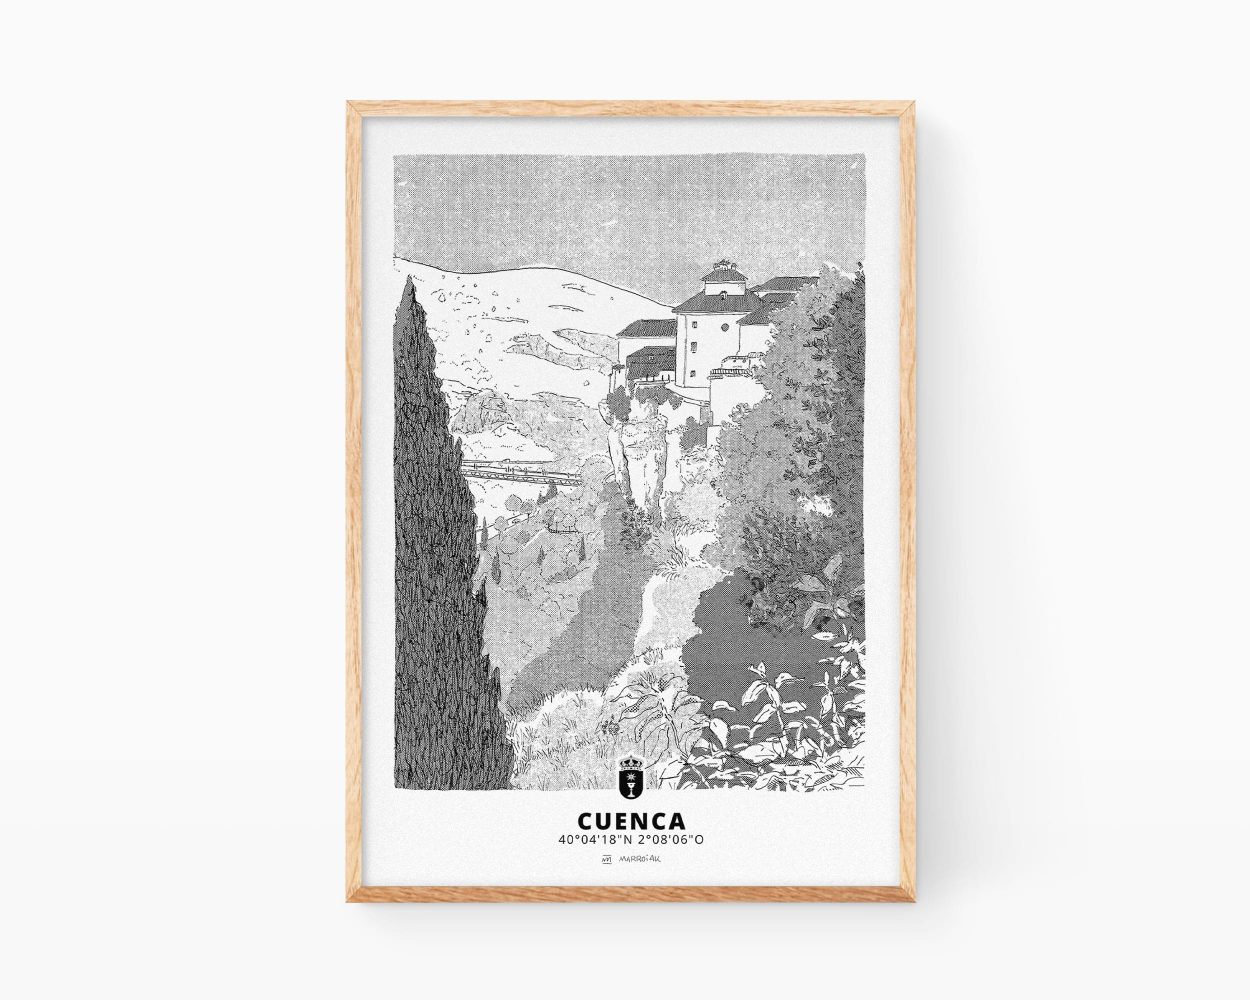 Cuenca wall art print. Travel poster of Spain with a black and white landscape